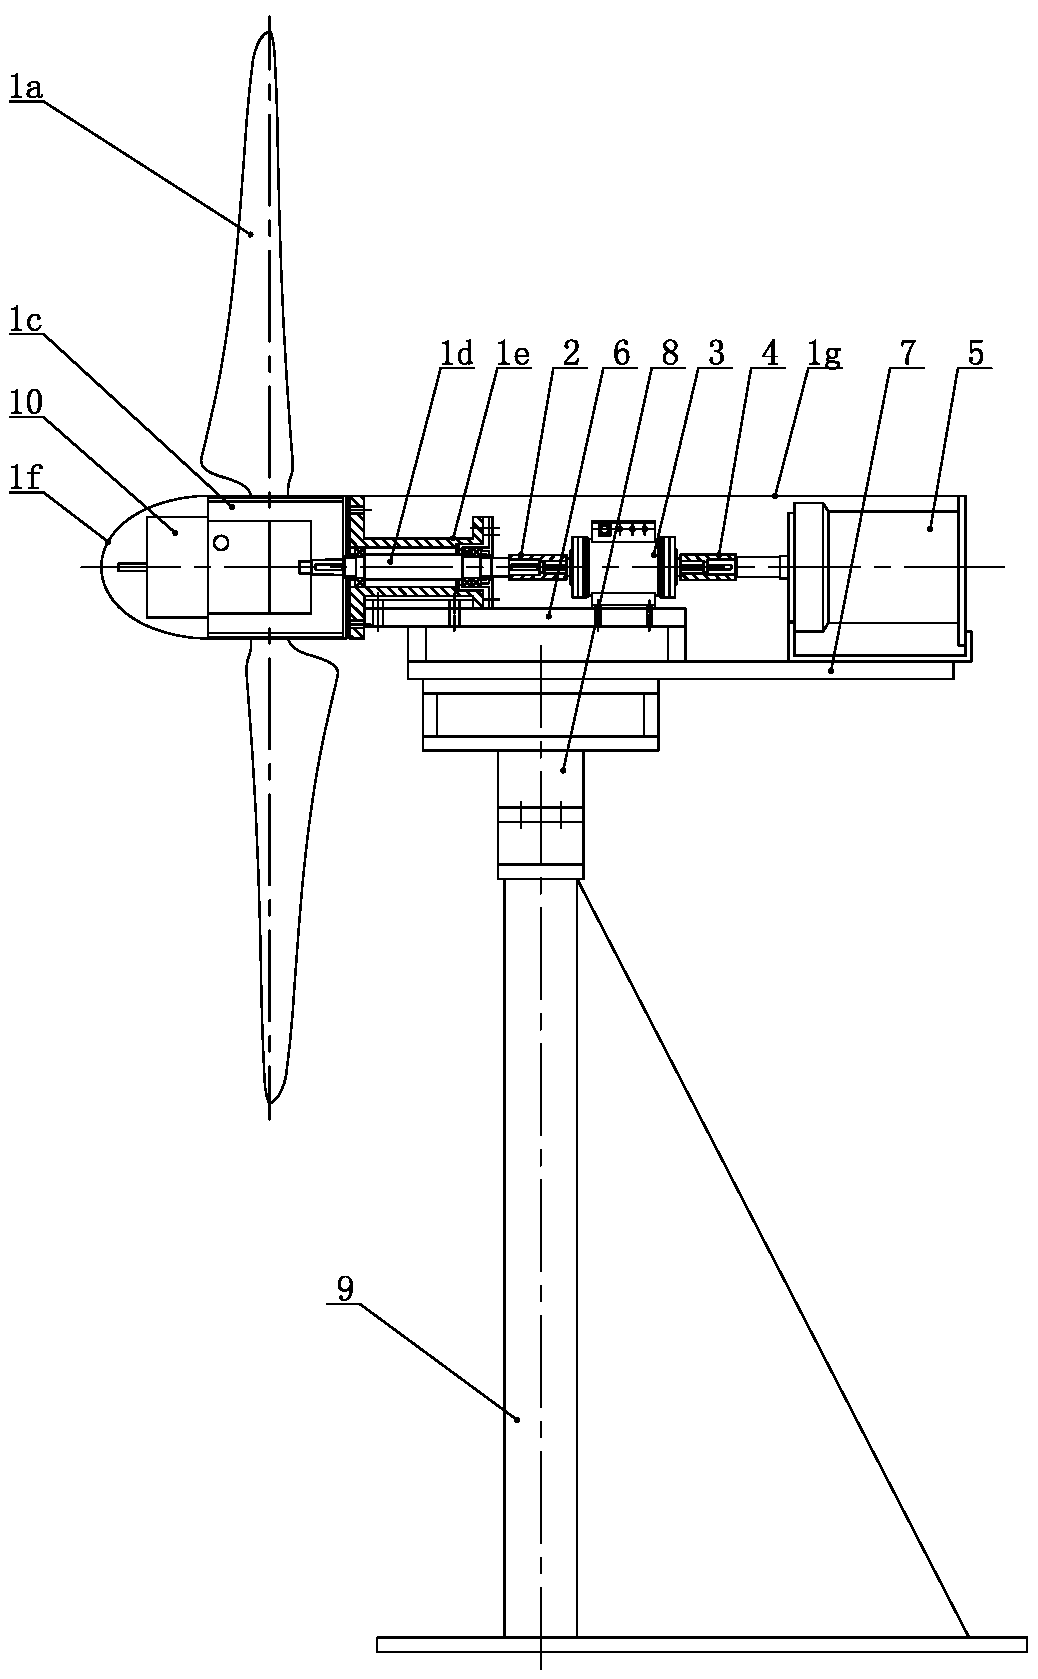 Small-power wind turbine aerodynamic characteristic measuring device suitable for wind tunnel test